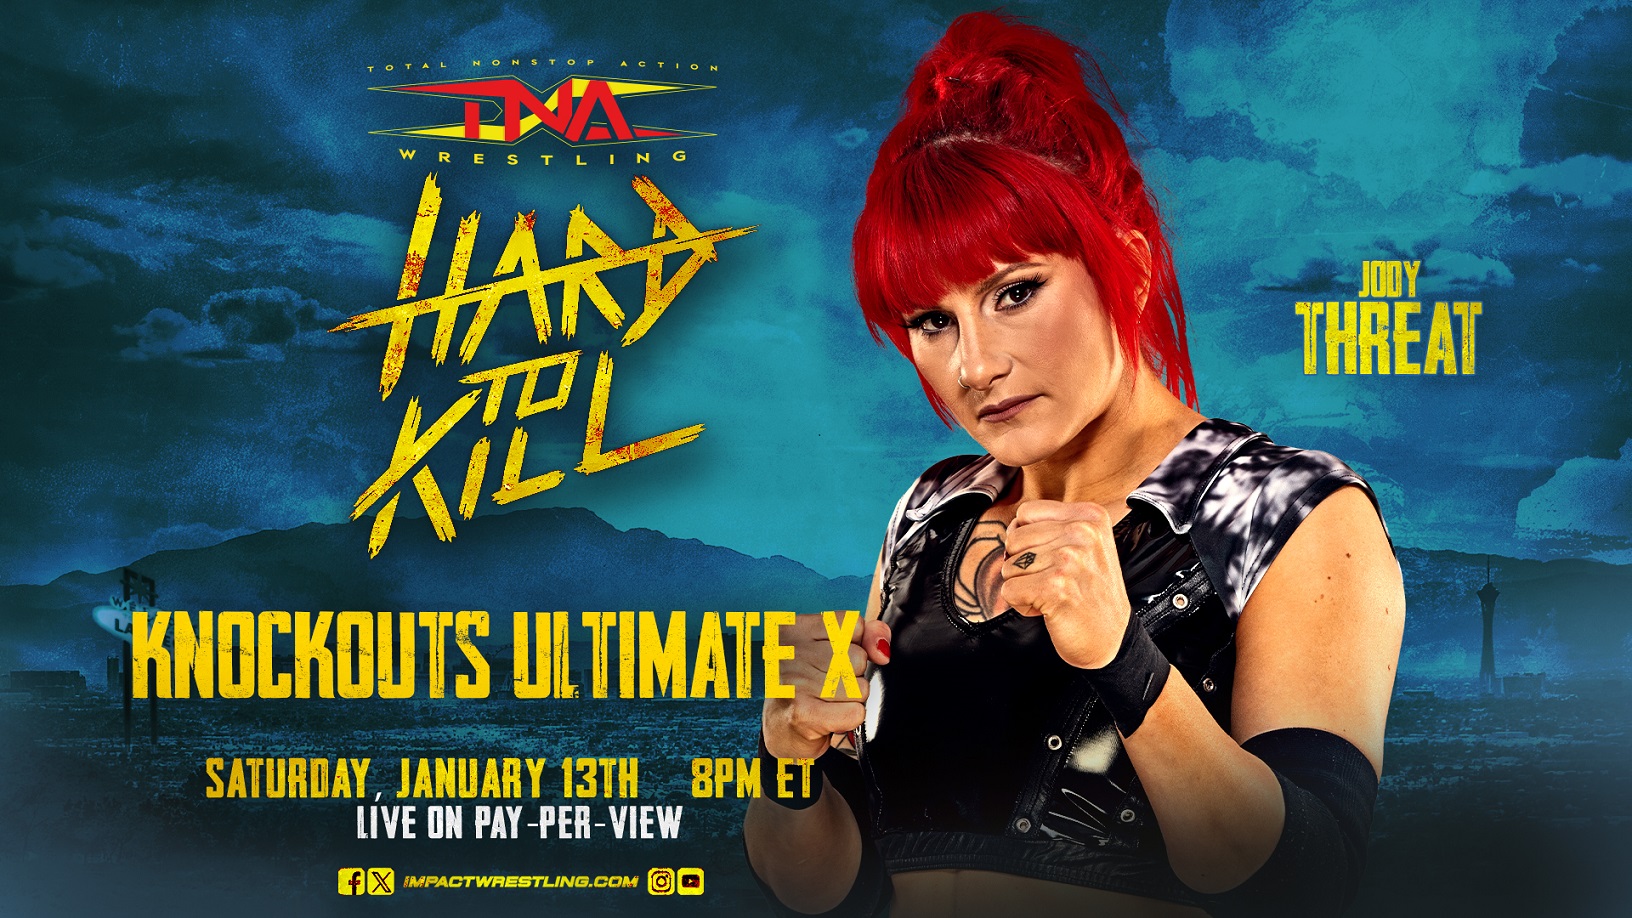 Jody Threat Joins the Fray for Knockouts Ultimate X at TNA Hard To Kill – TNA Wrestling